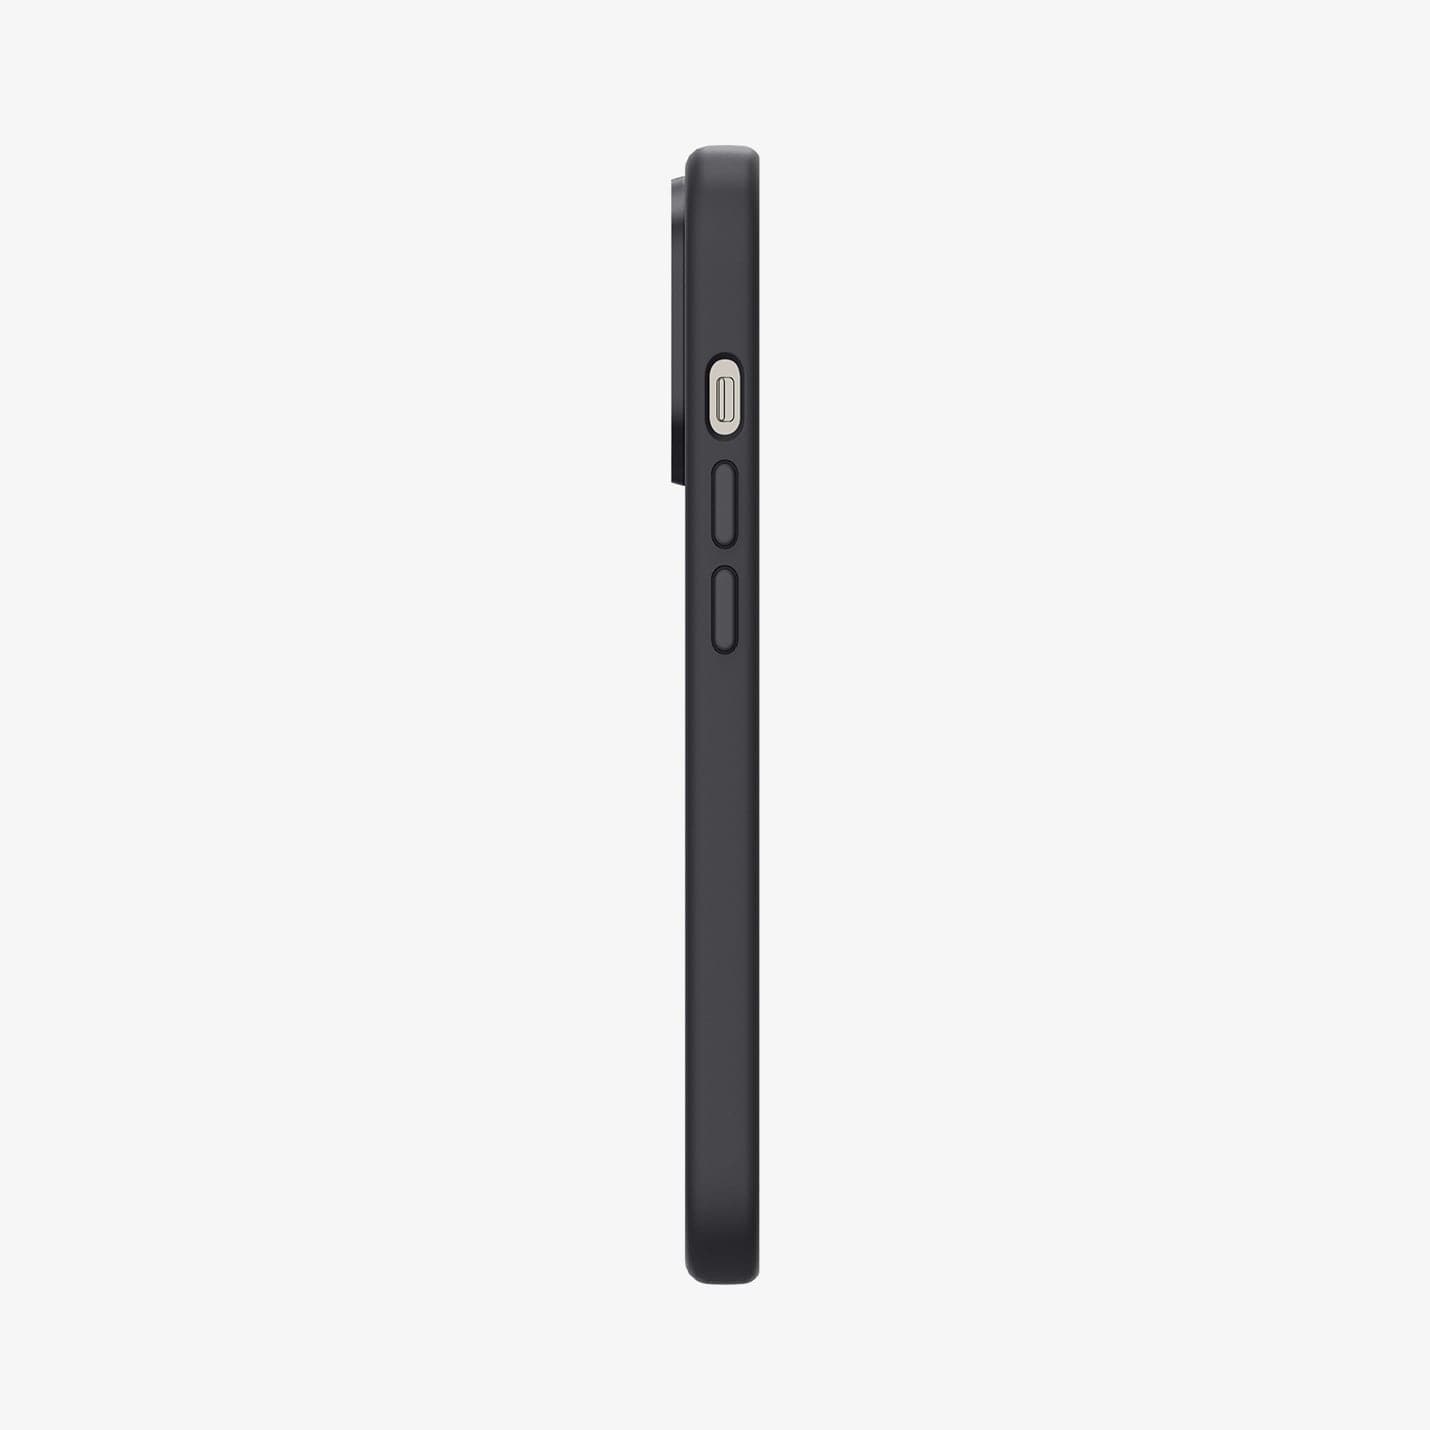 ACS04087 - iPhone 13 Pro Case Silicone Fit Mag (Mag Fit) in black showing the side with volume controls